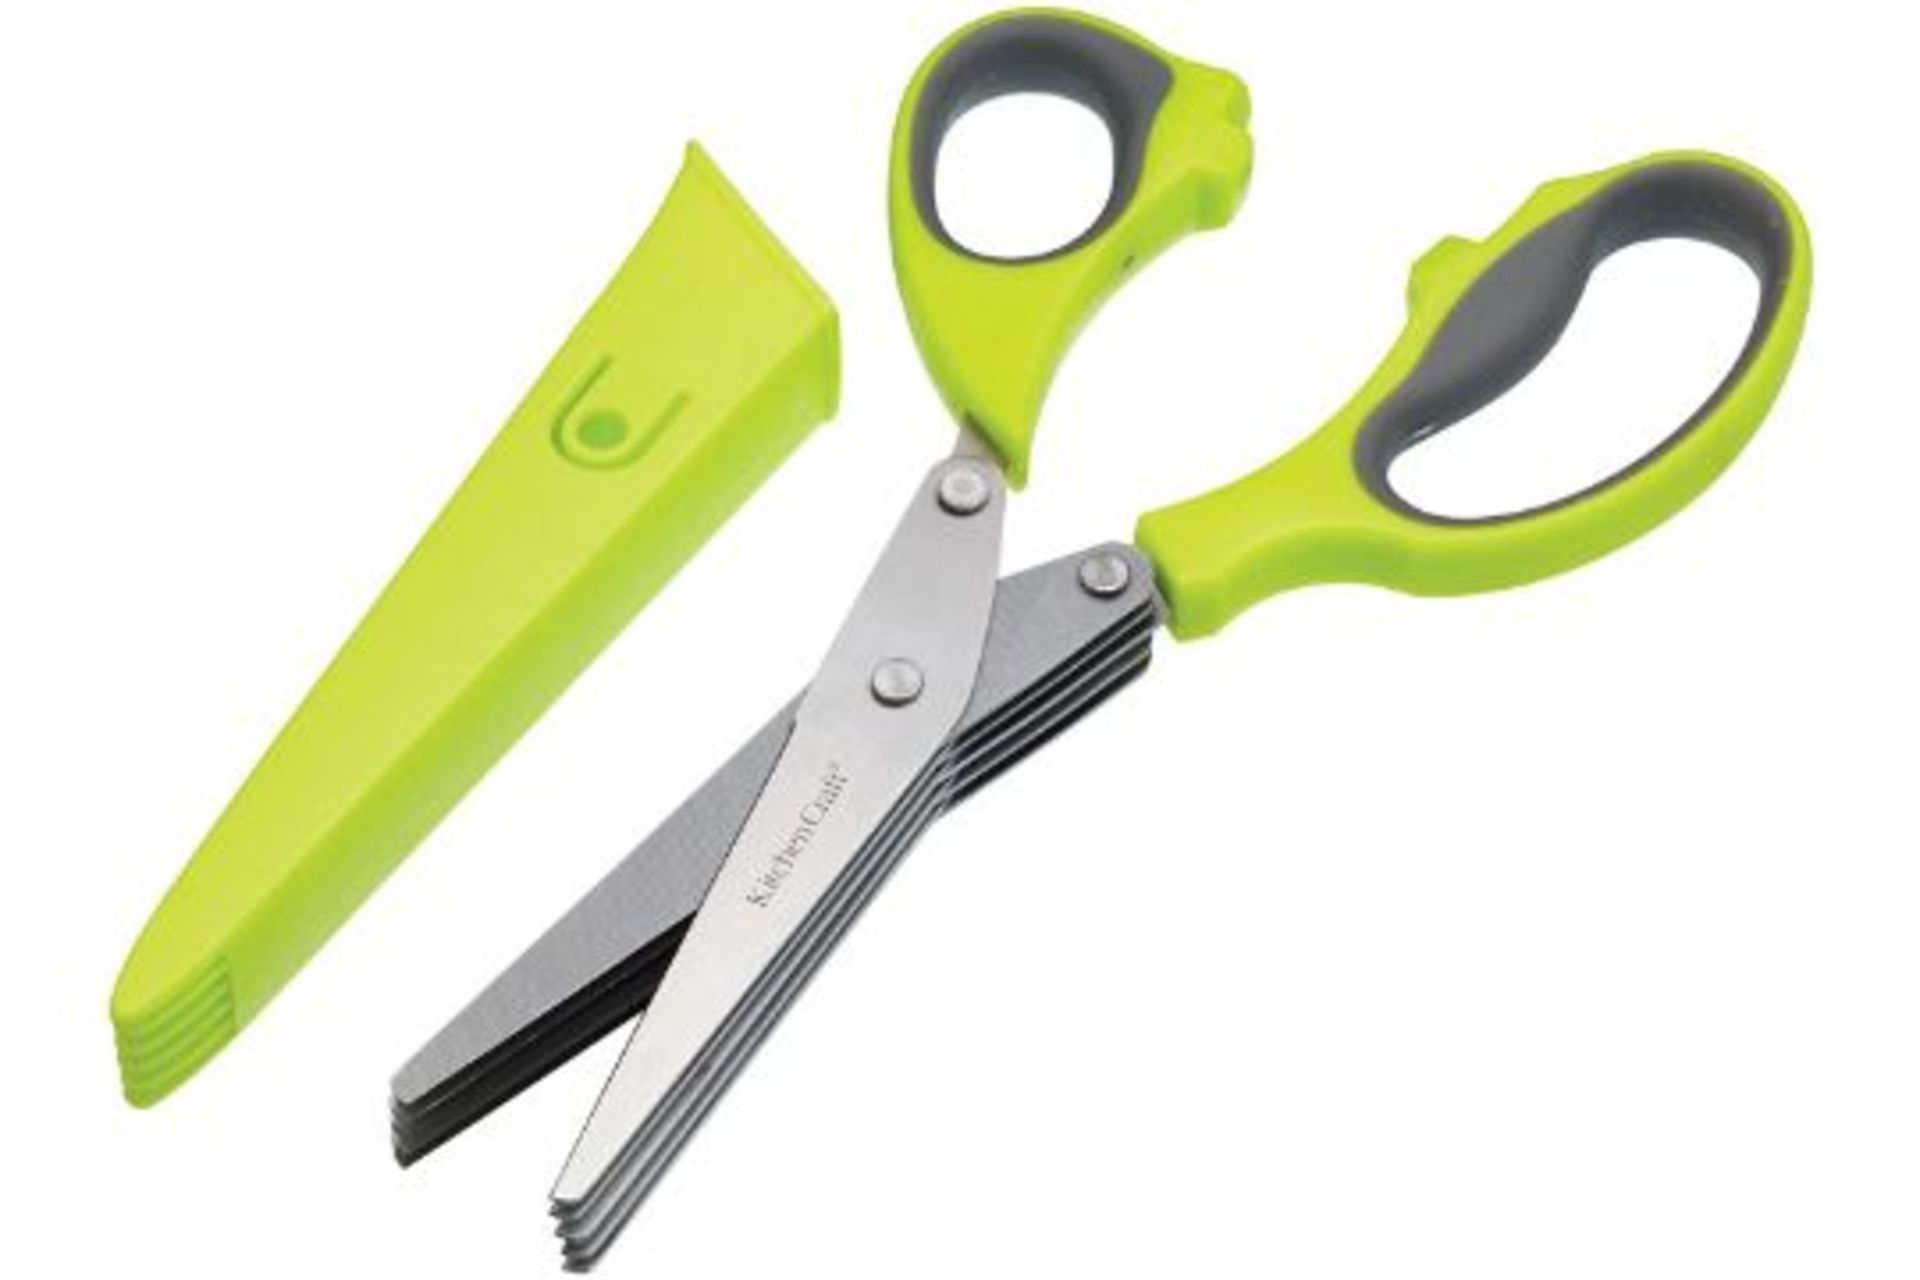 BRAND NEW GARDEN CHEF HERB SCISSORS AND CASE - RRP £7.54